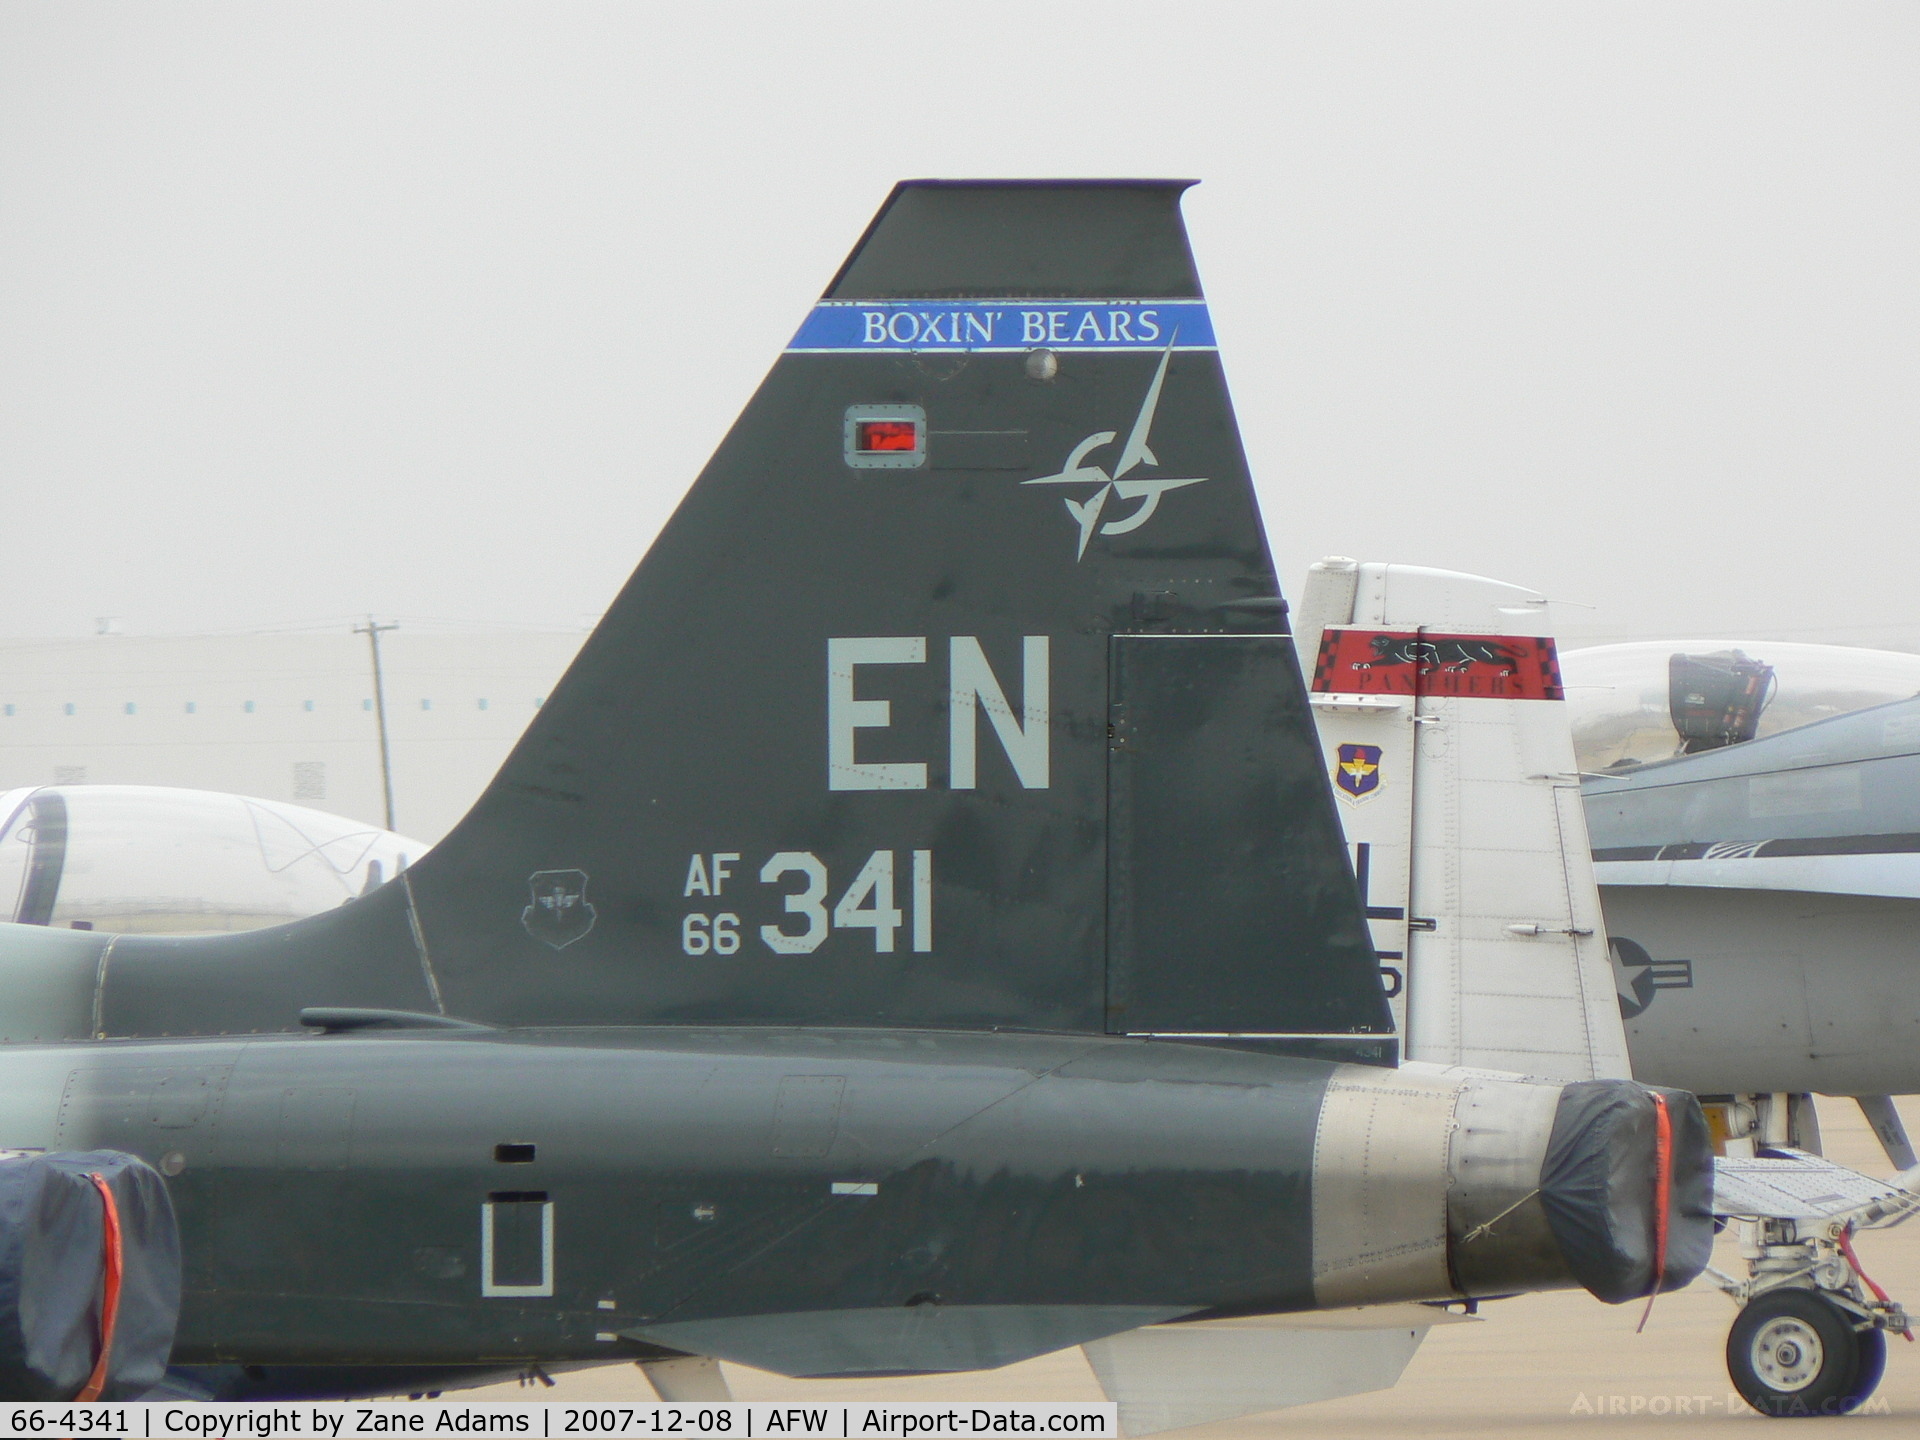 66-4341, 1966 Northrop T-38A Talon C/N N.5918, On the ramp at Alliance Ft. Worth - Tail shot only because of parking formation